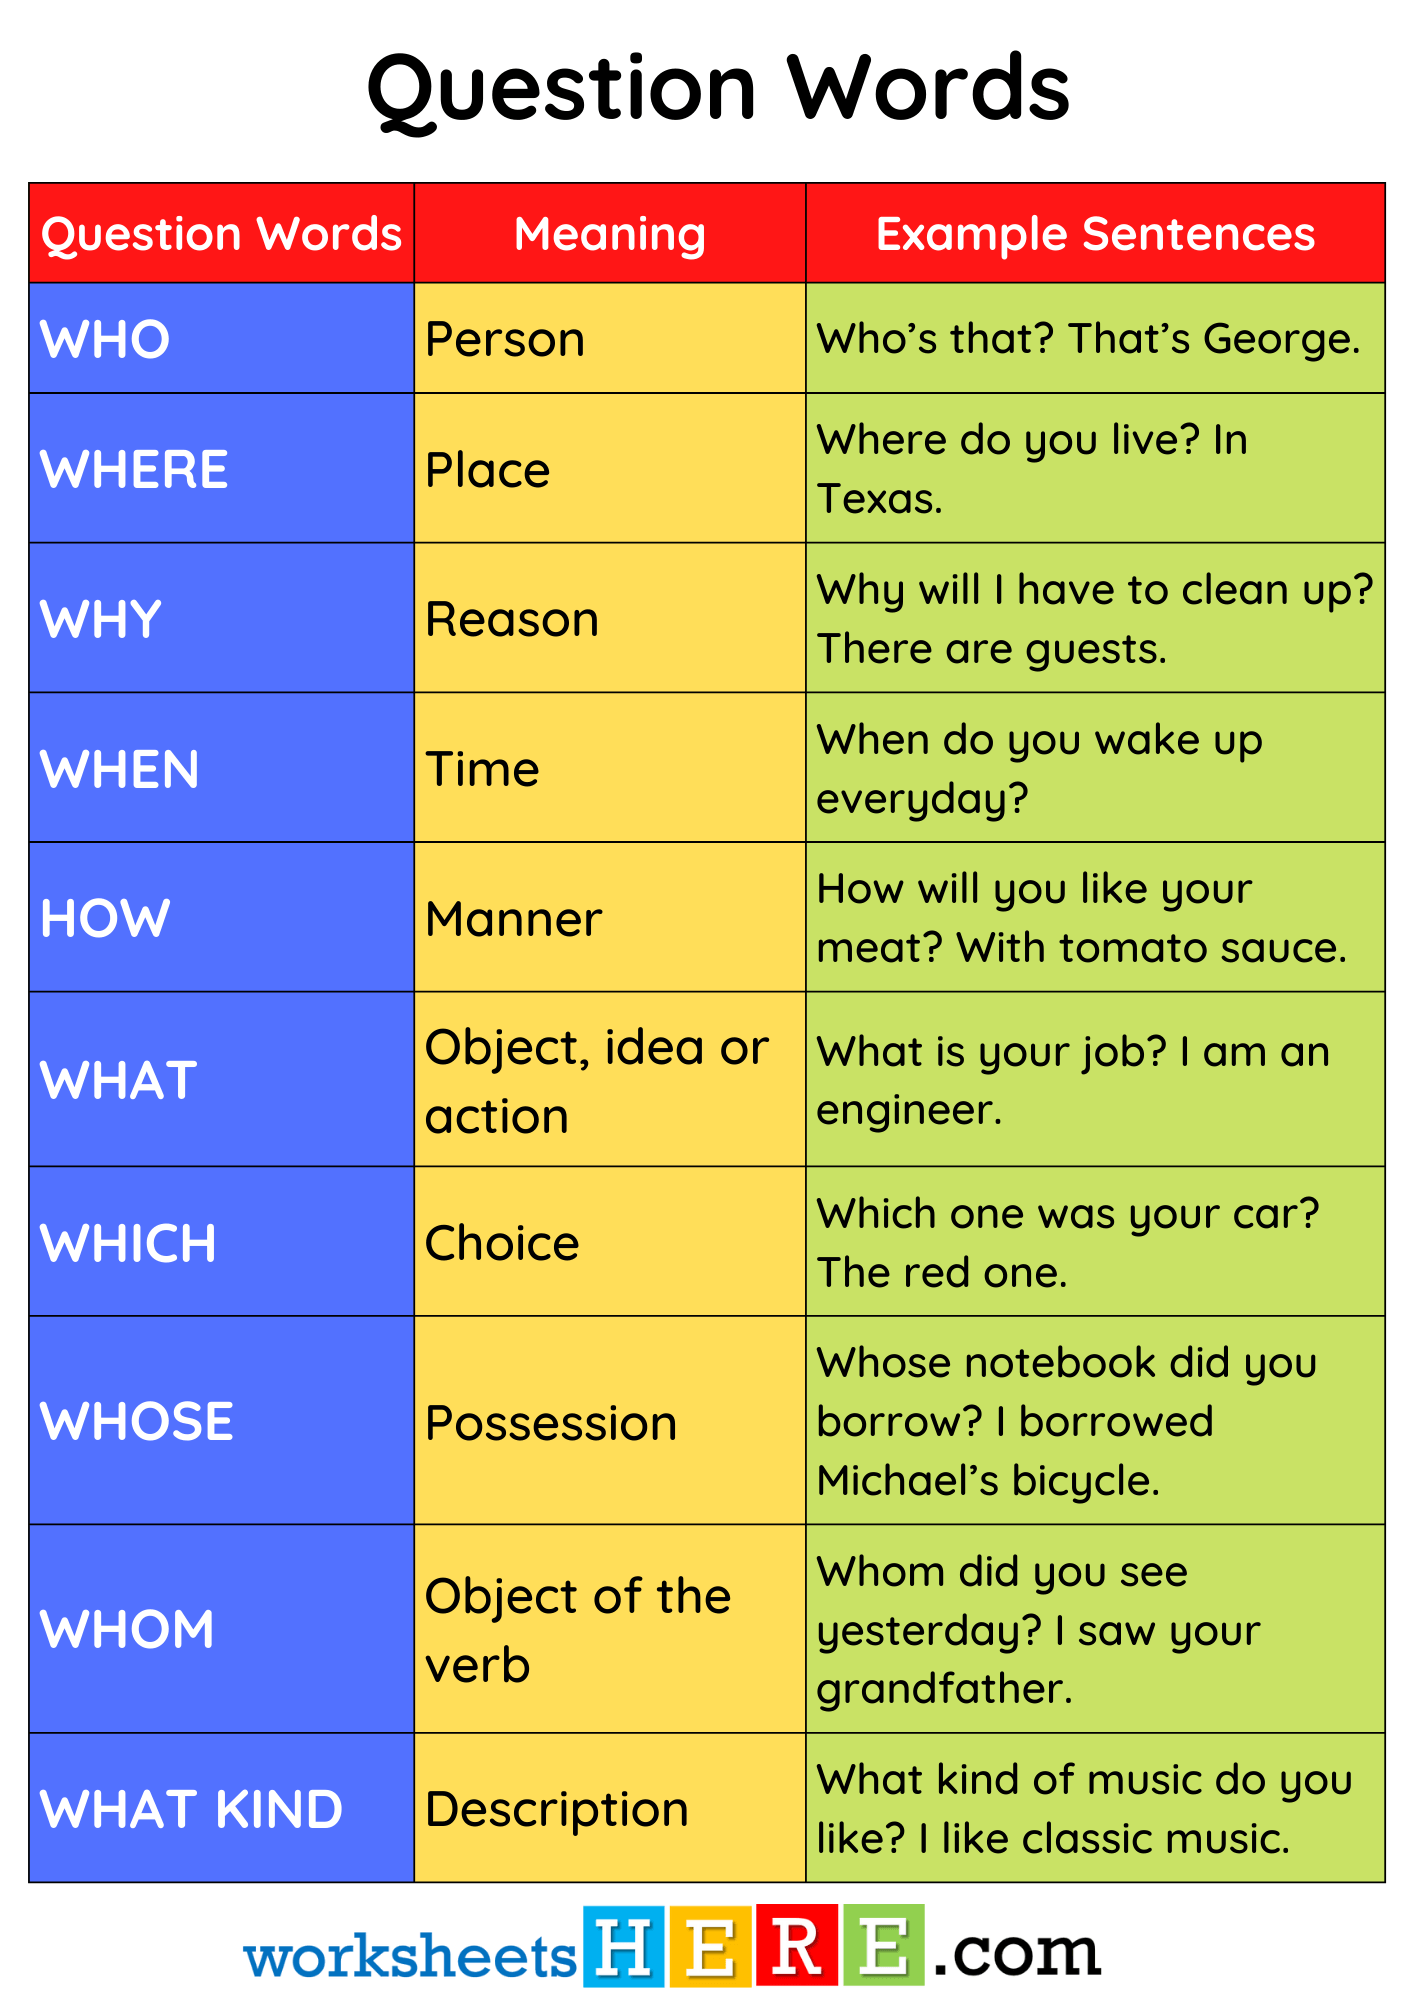 English Question Words WH List, Meaning and Example Sentences PDF Worksheet